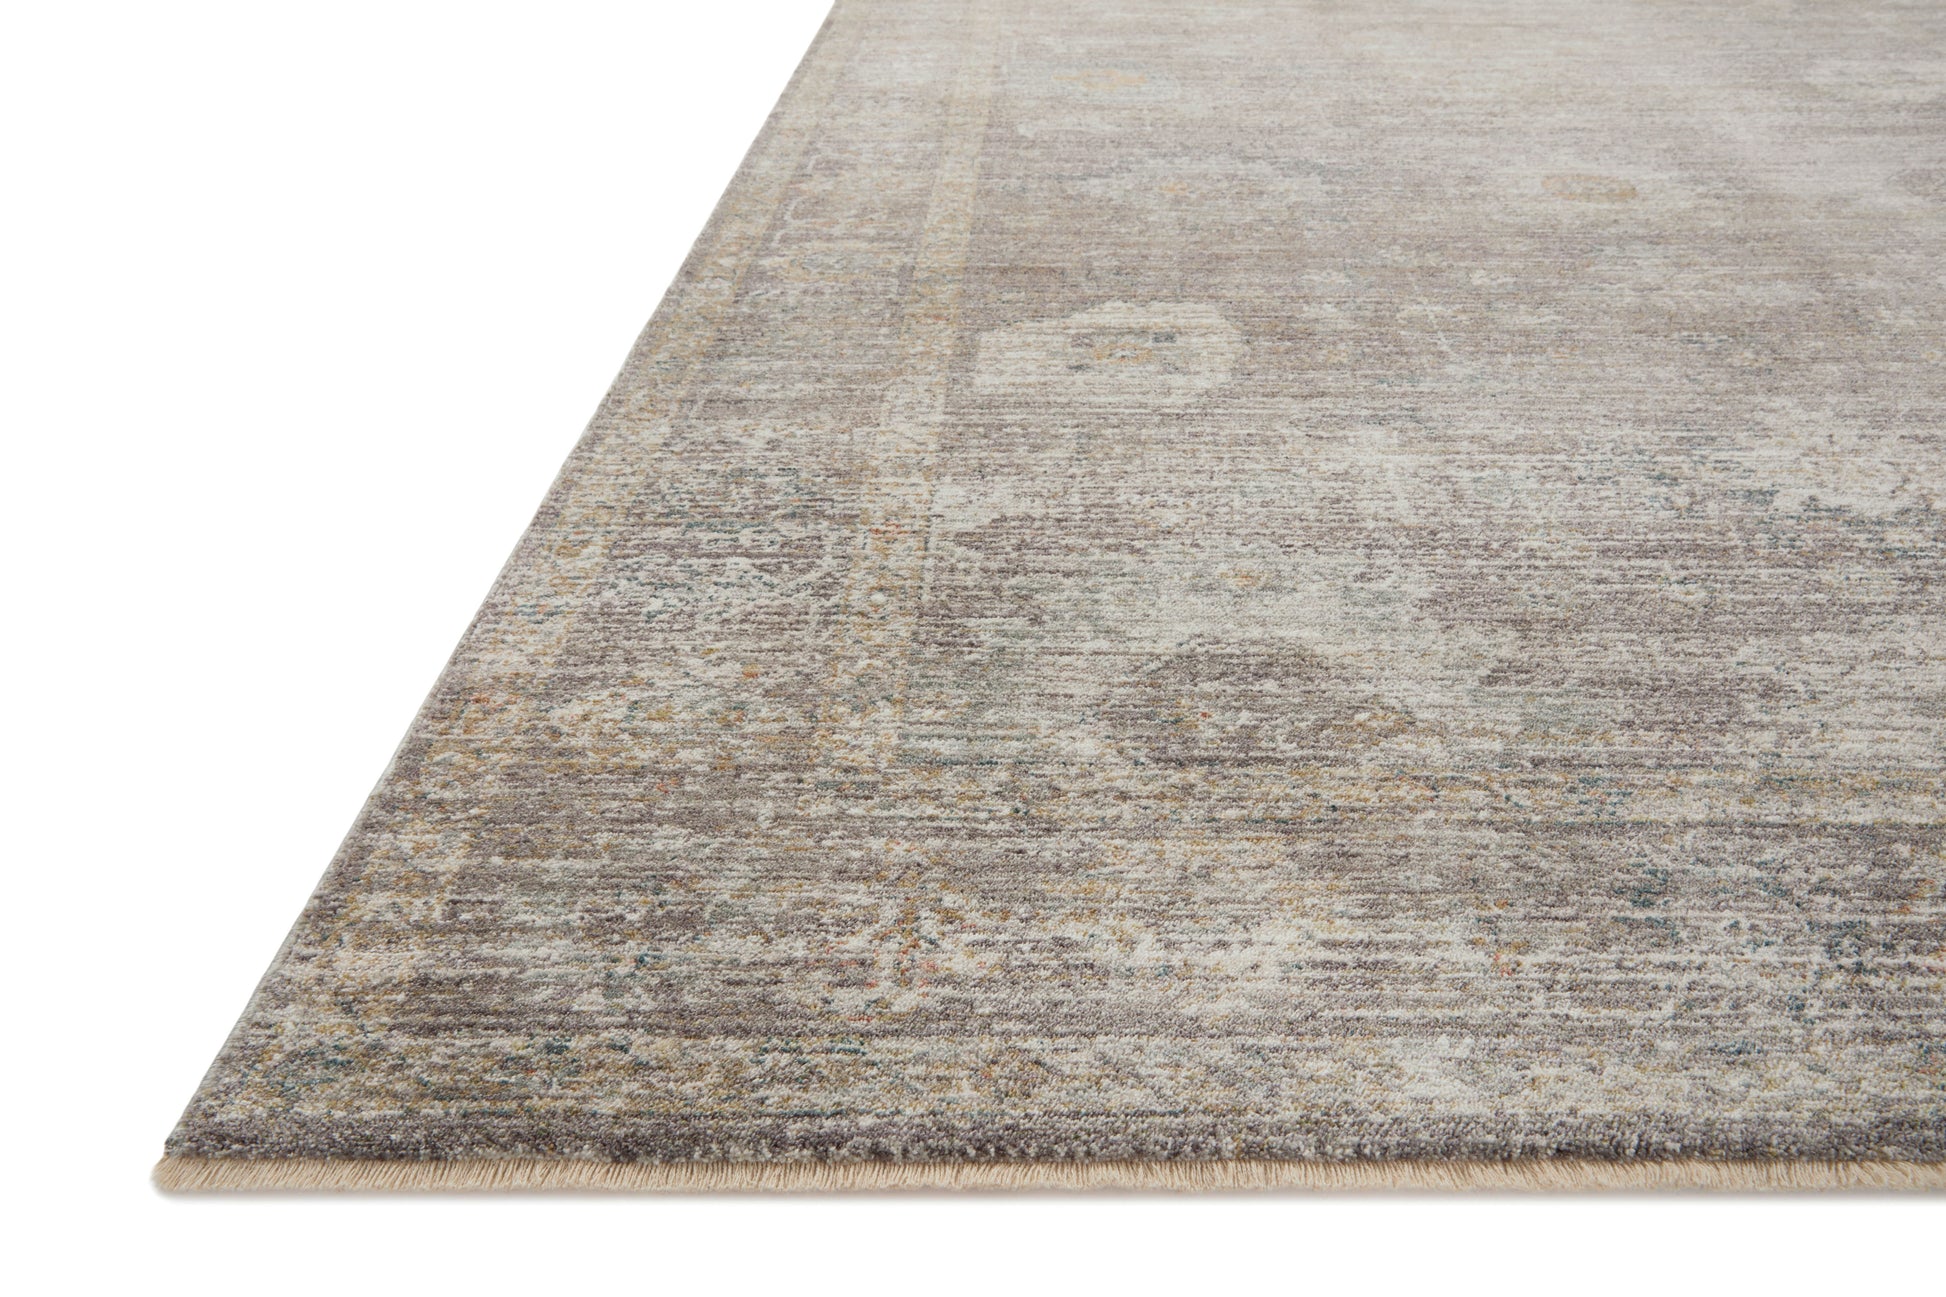 Loloi Millie Rug Collection - Stone / Natural - Magnolia Home by Joanna Gaines-Blue Hand Home